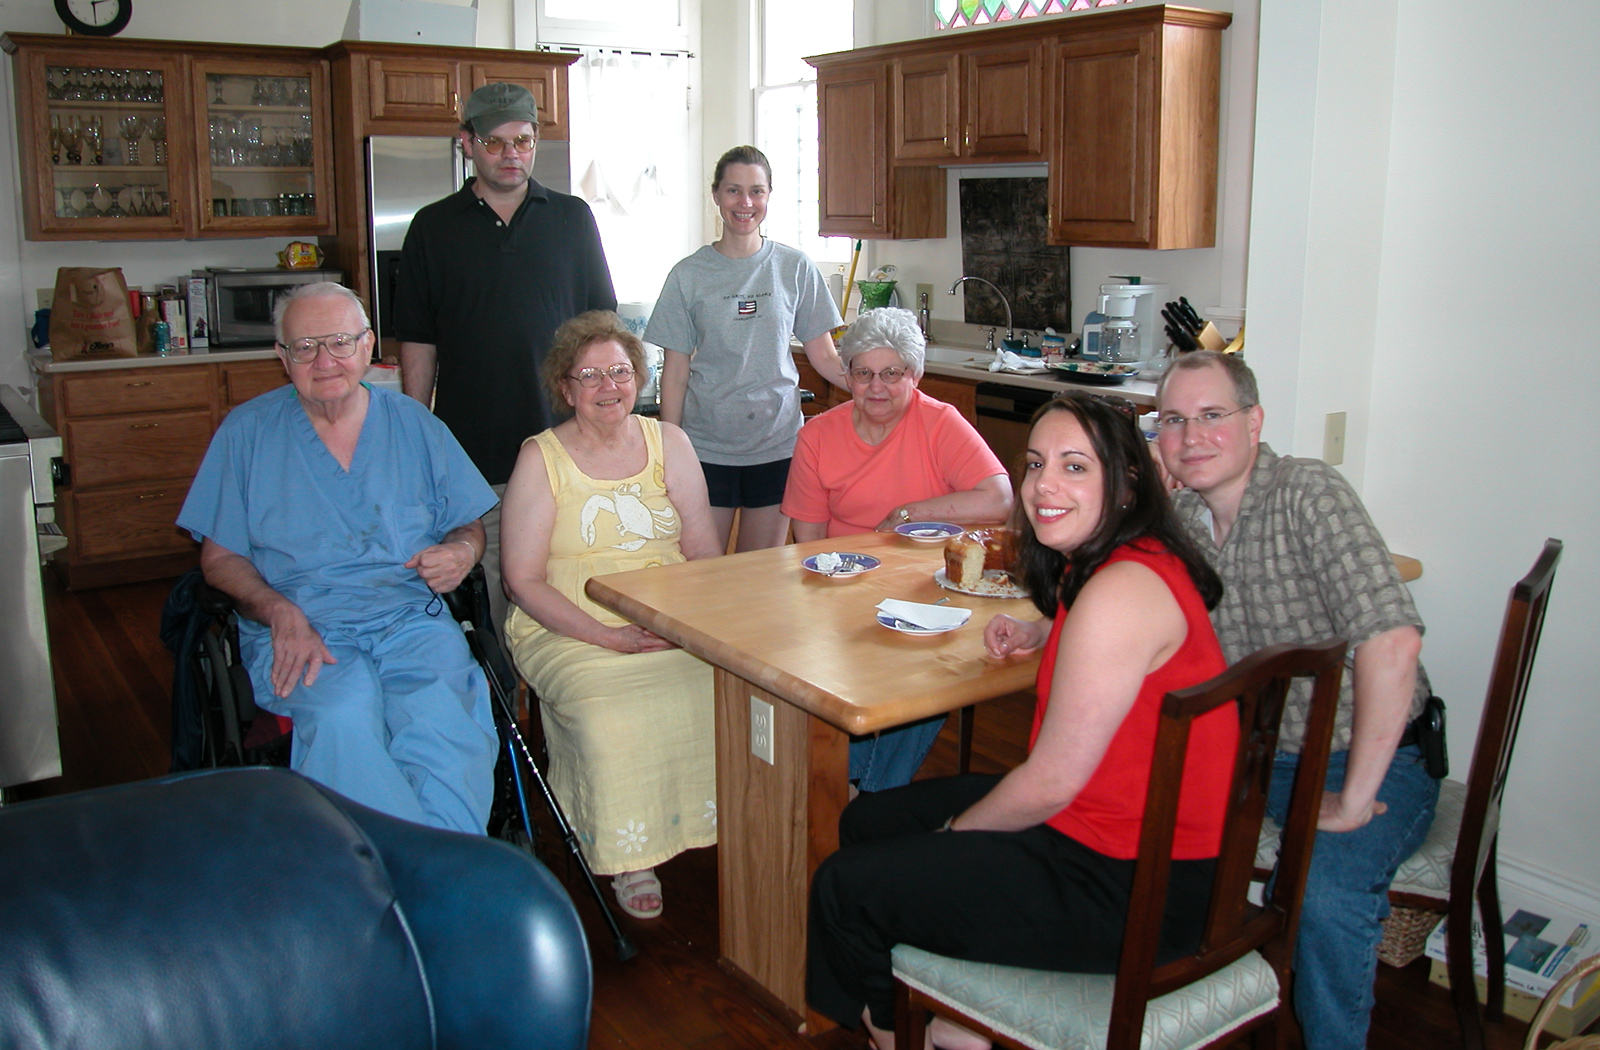 Uncle Norman, Charlie (standing), Aunt Nell, Jennifer (standing), Mom, Dara, and Marc in Jennifer's kitchen